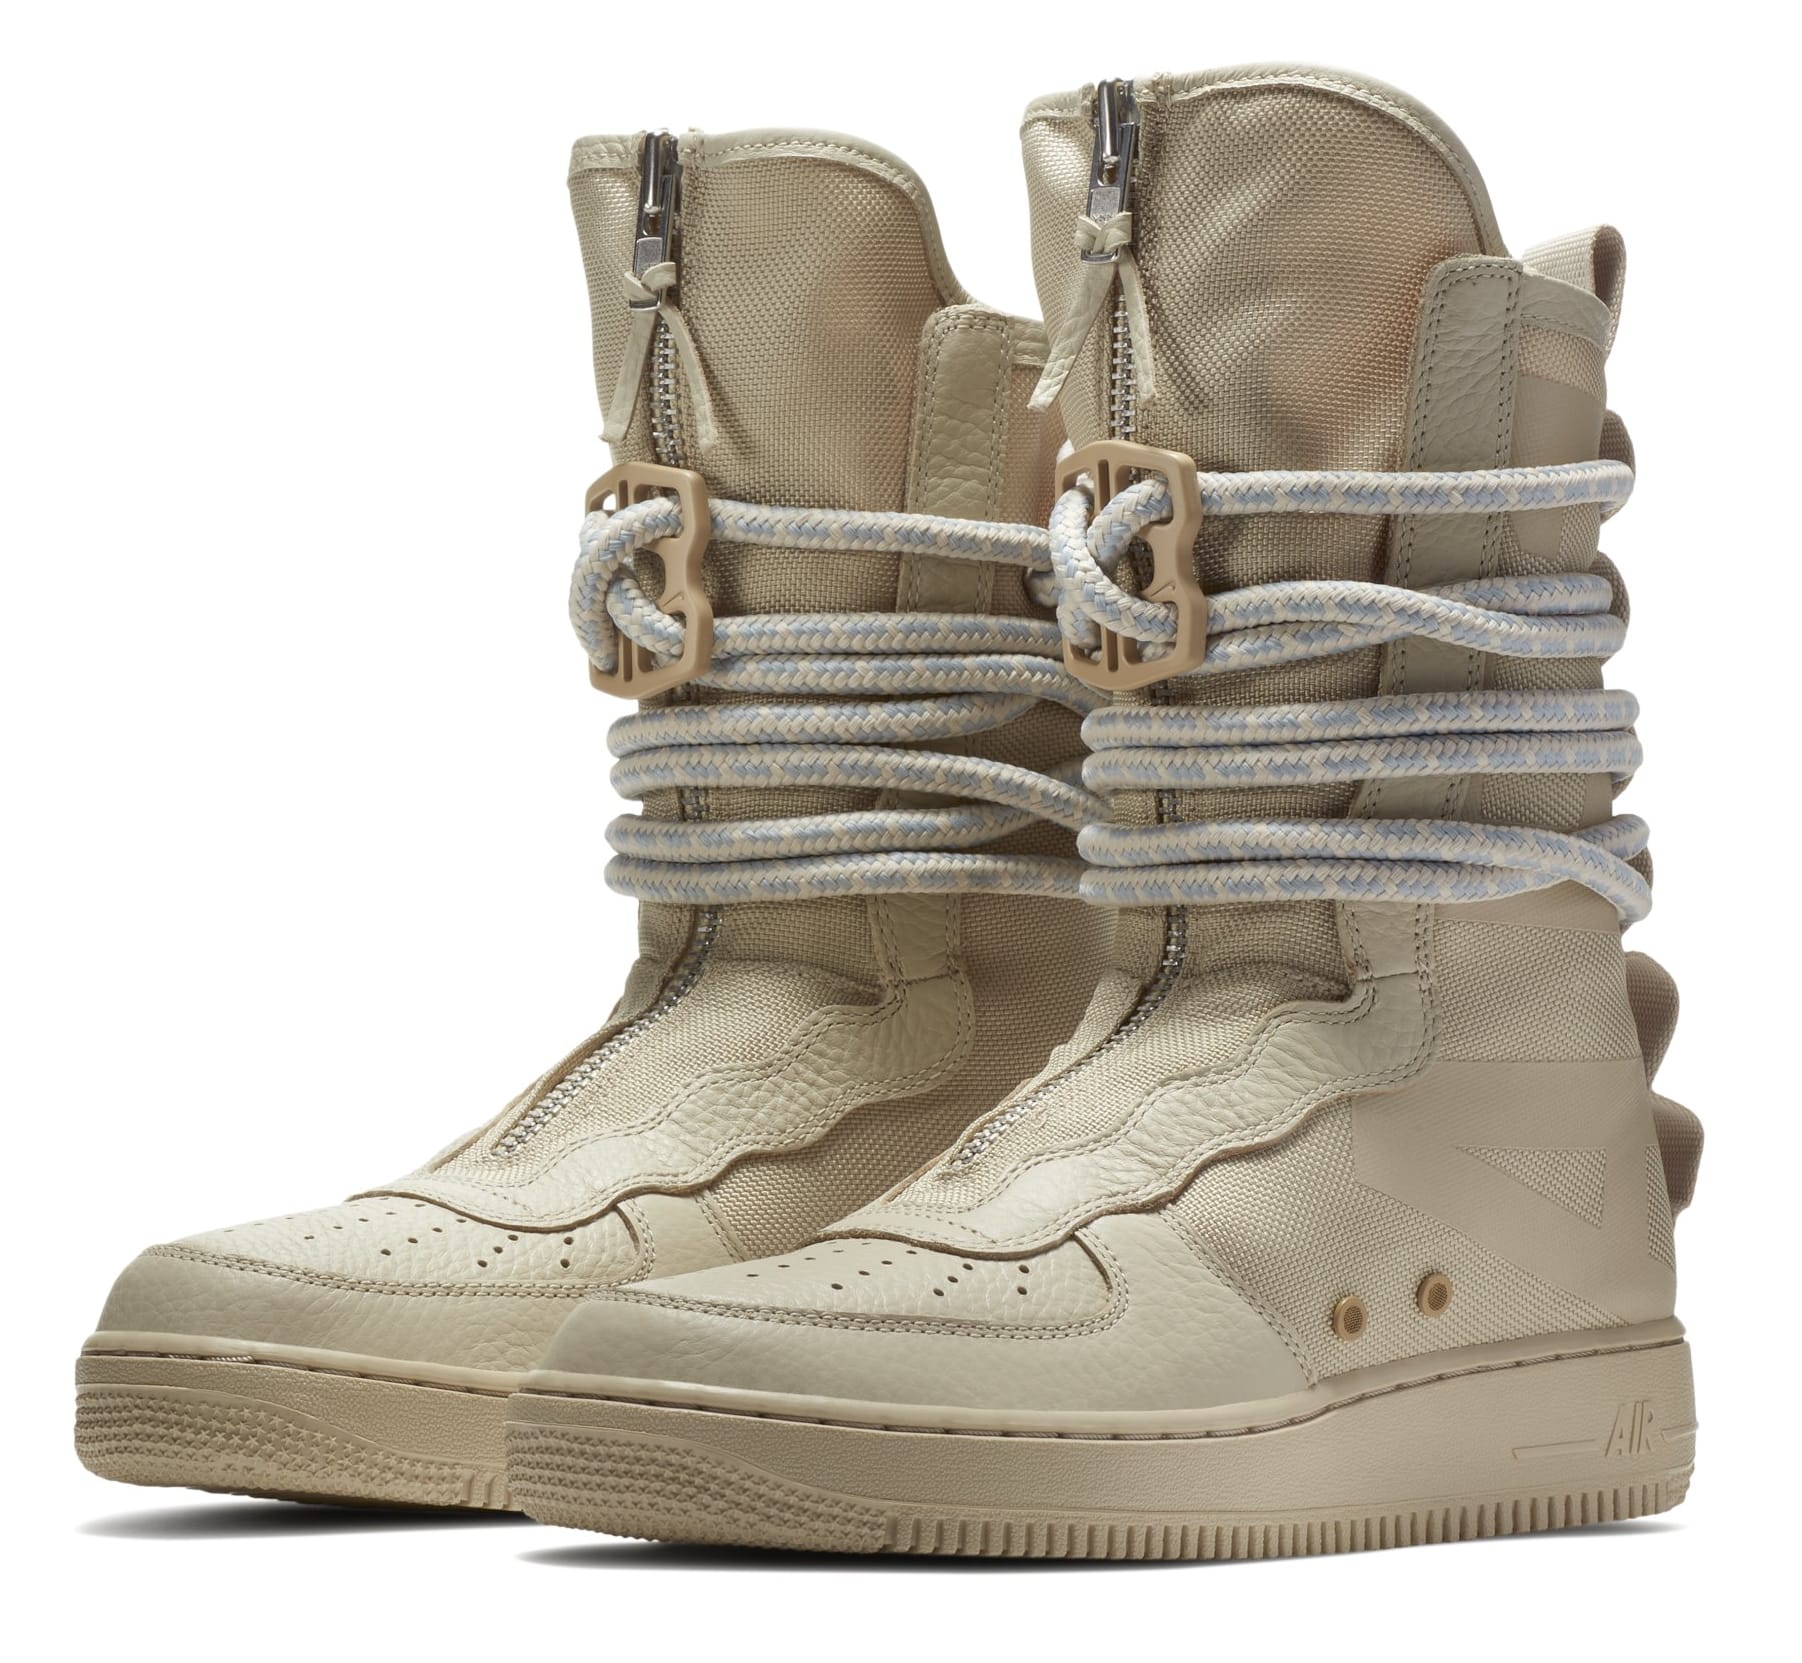 Nike SF AF1 High Pack - Release Date Roundup: The Sneakers You Need to ...